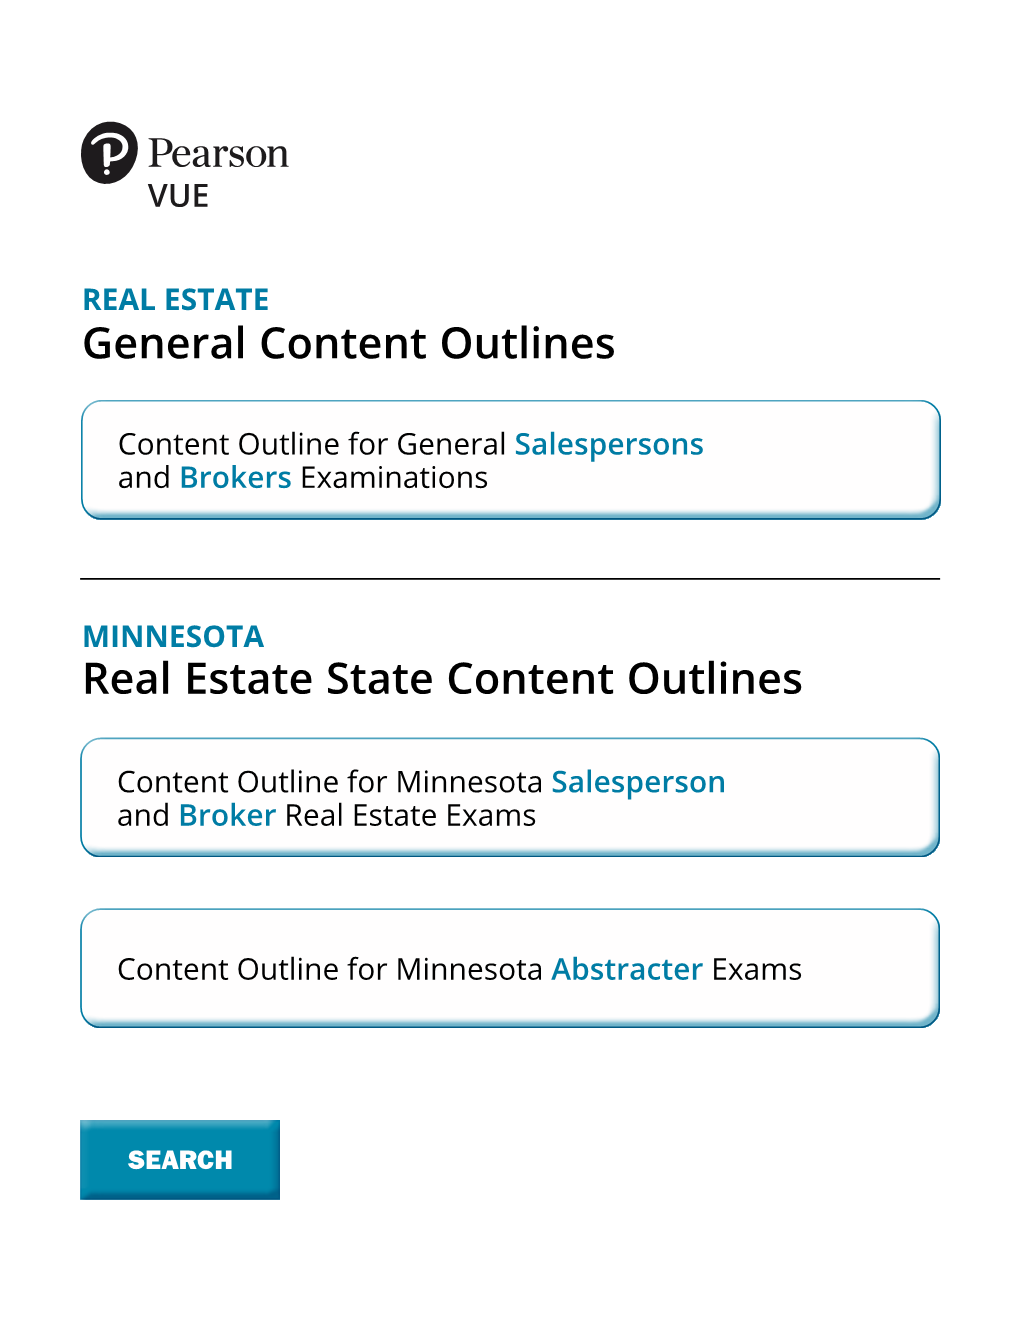 REAL ESTATE General Content Outlines